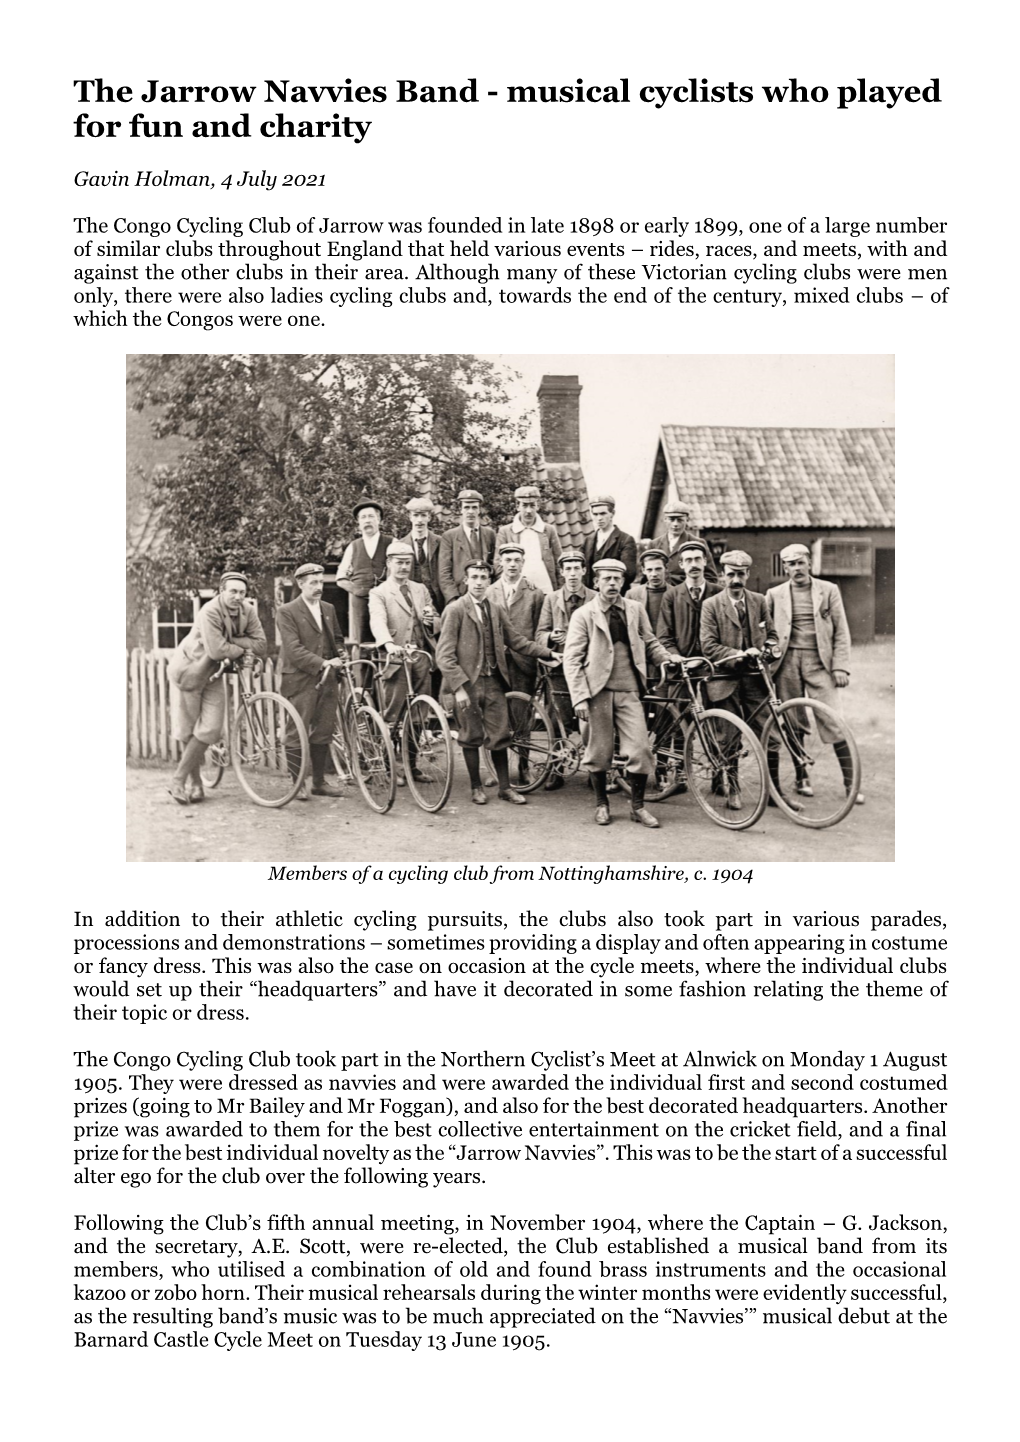 The Jarrow Navvies Band - Musical Cyclists Who Played for Fun and Charity